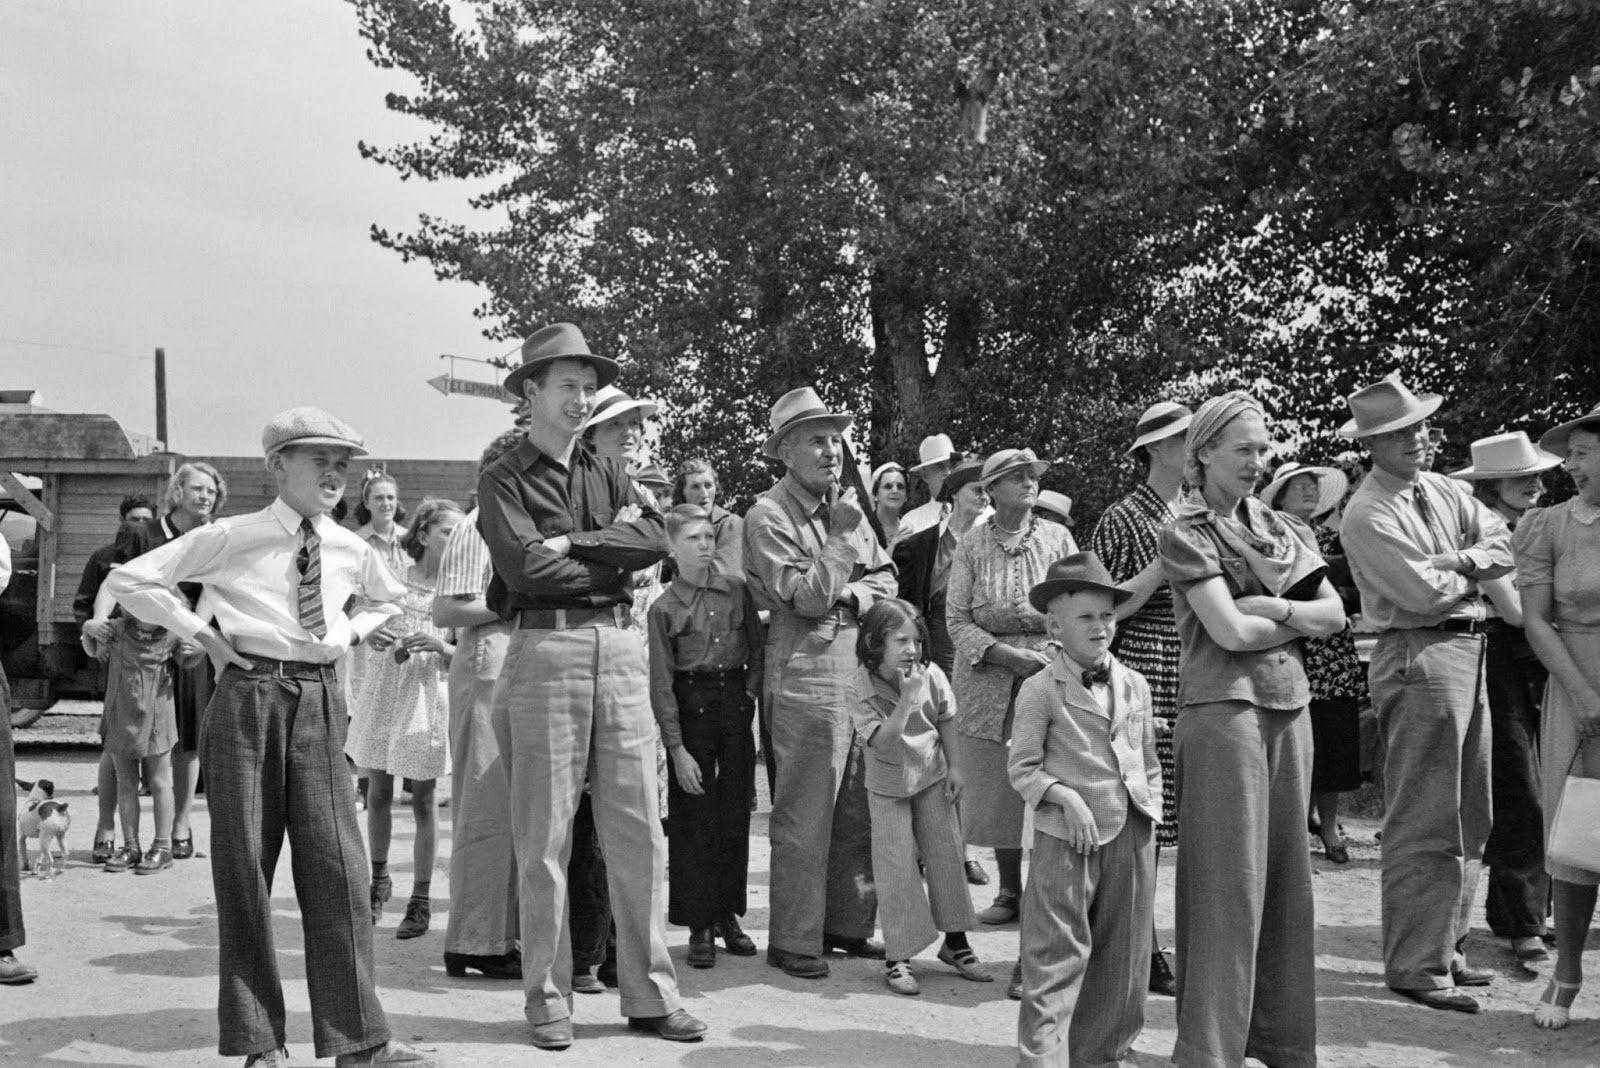 Russell+Lee+-+Spectators+at+childrens%27+races,+Labor+Day+celebration,+Ridgway,+Colorado,+1940.jpg